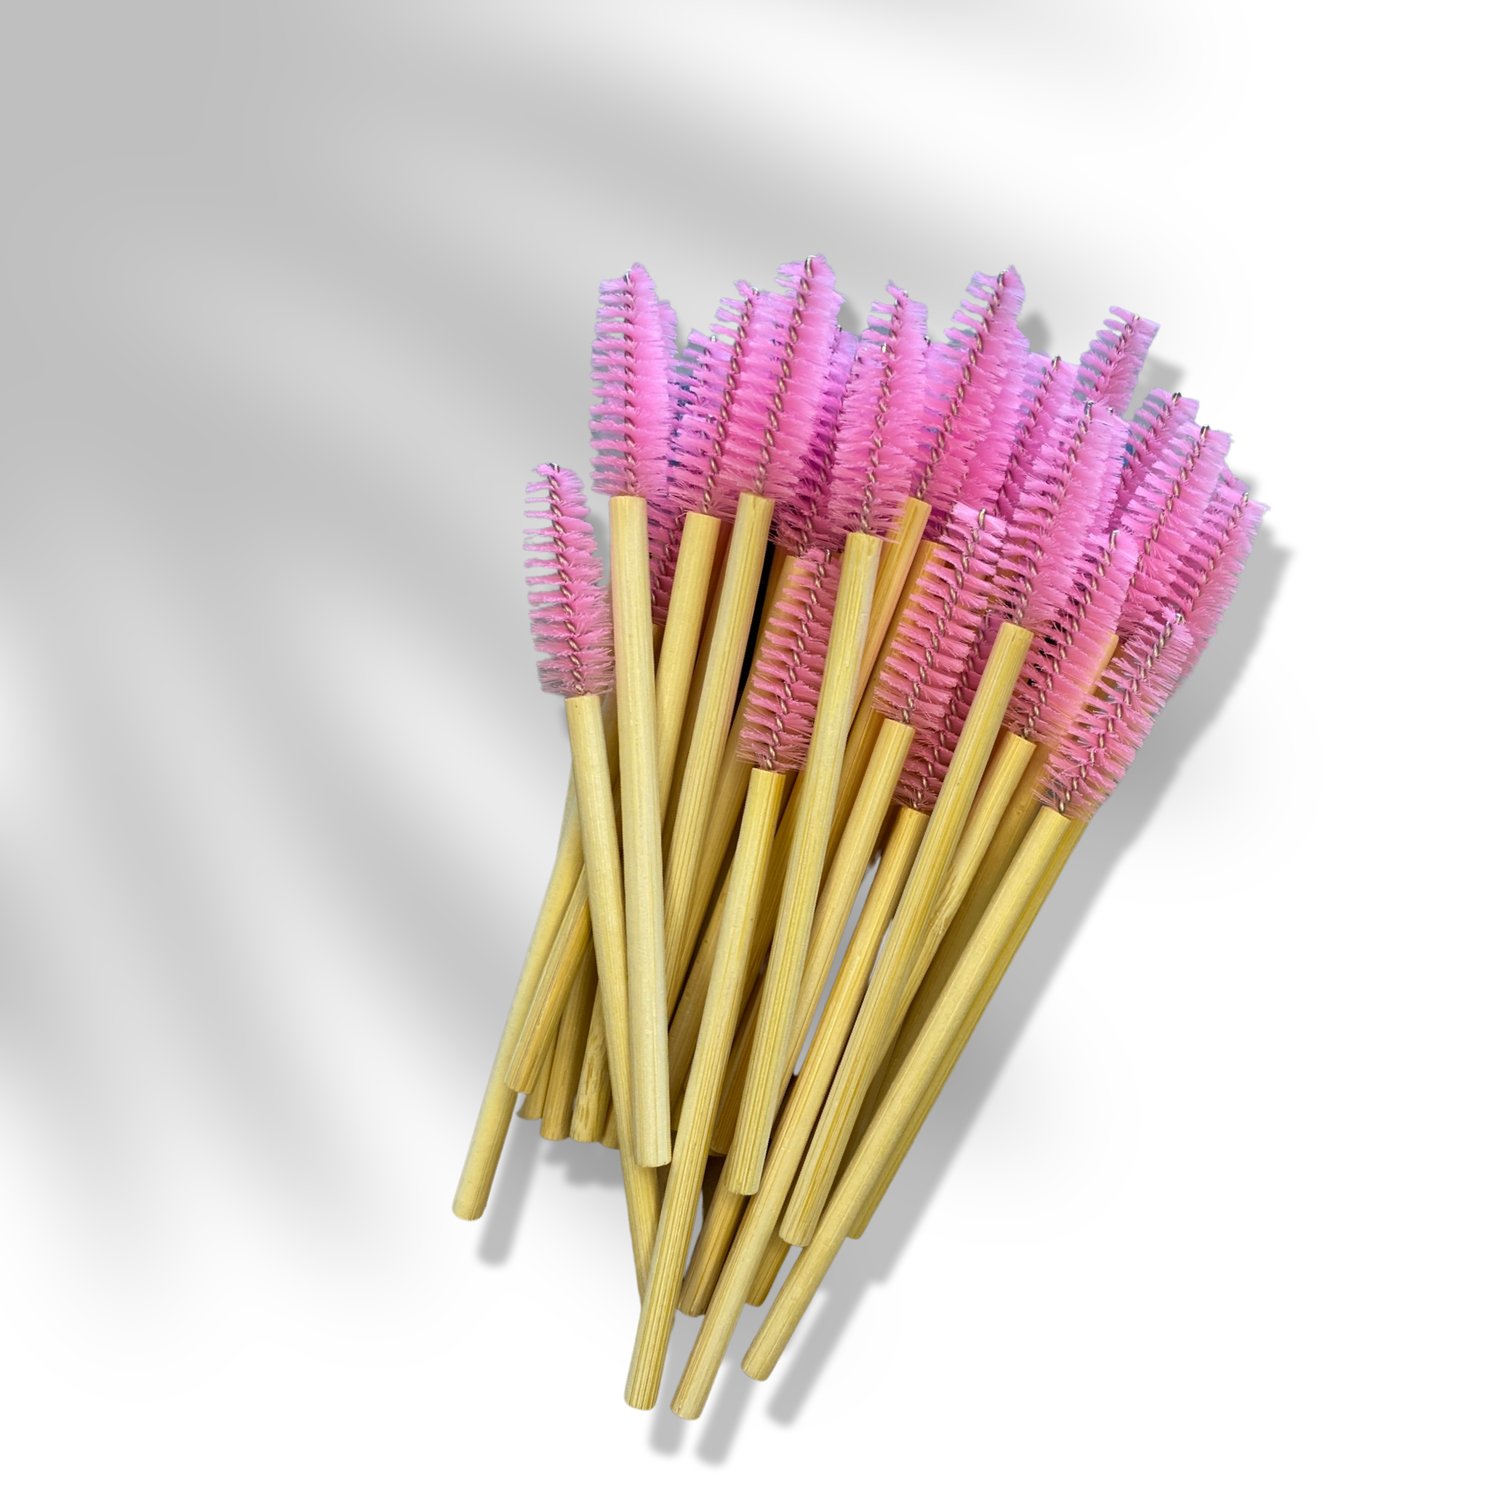 A bunch of brow/lash spoolies with bamboo handles and pink synthetic bristles laying flat.